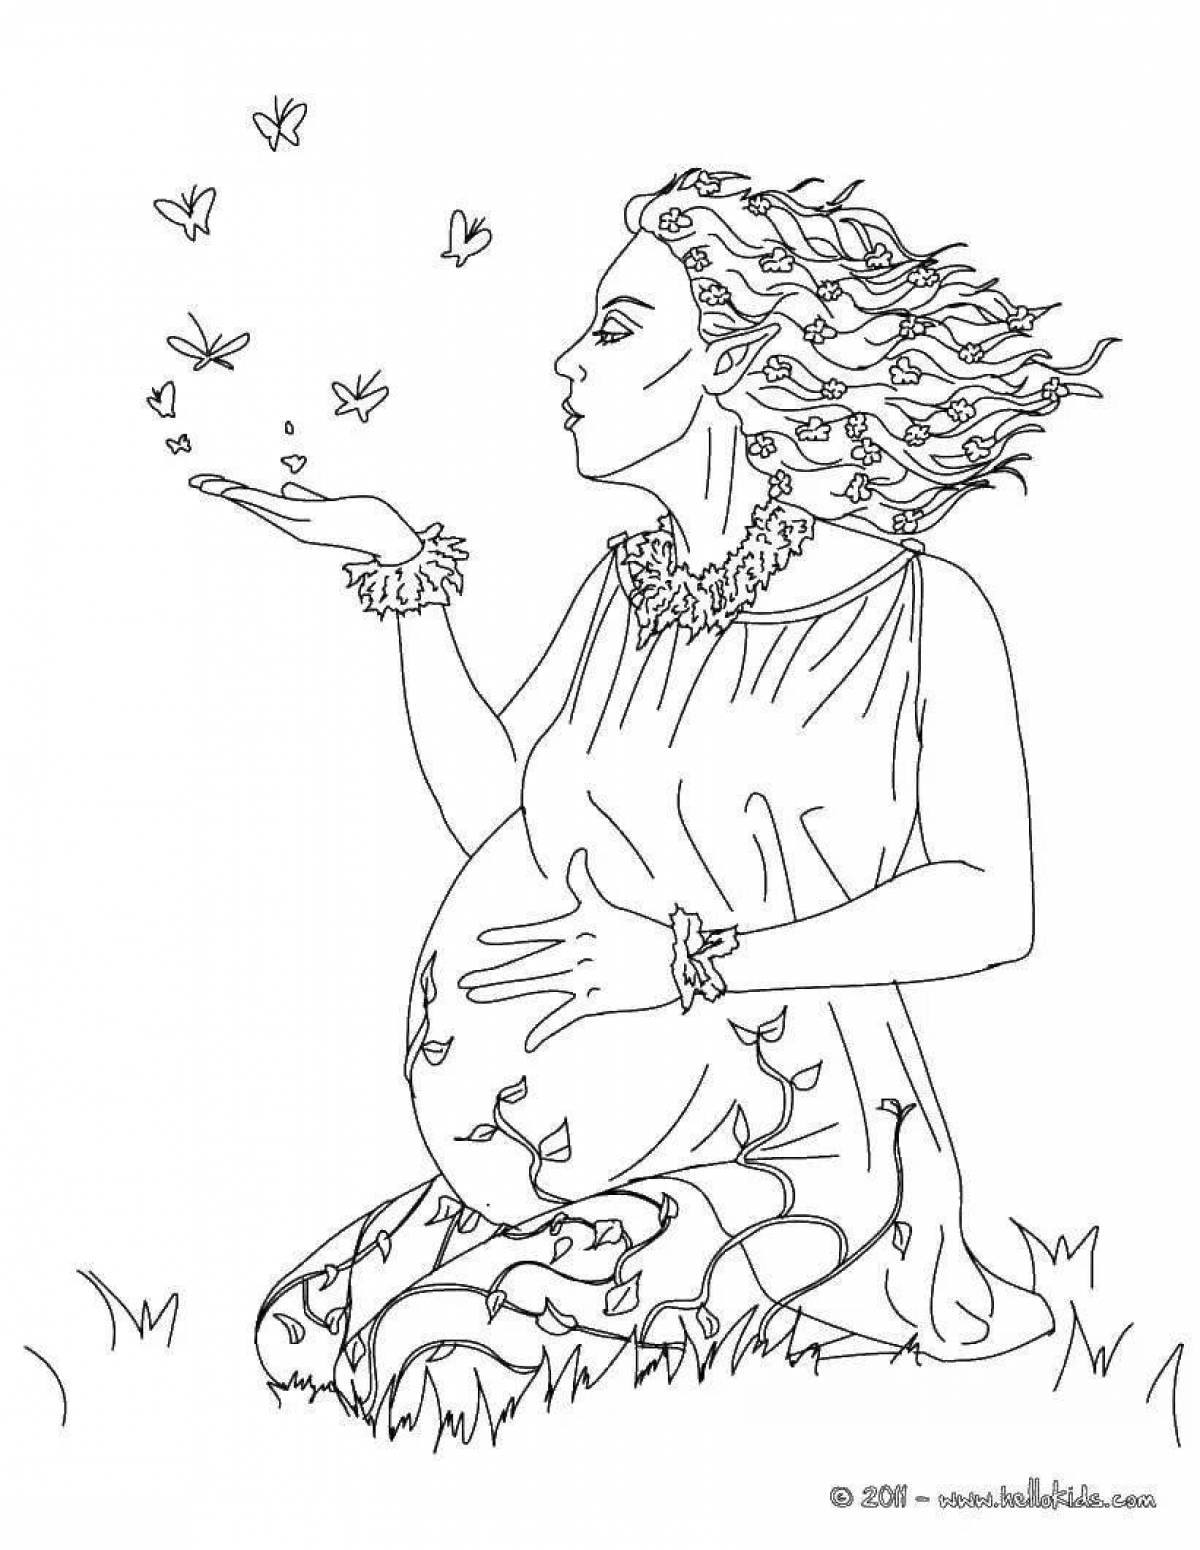 Blissful pregnancy coloring page